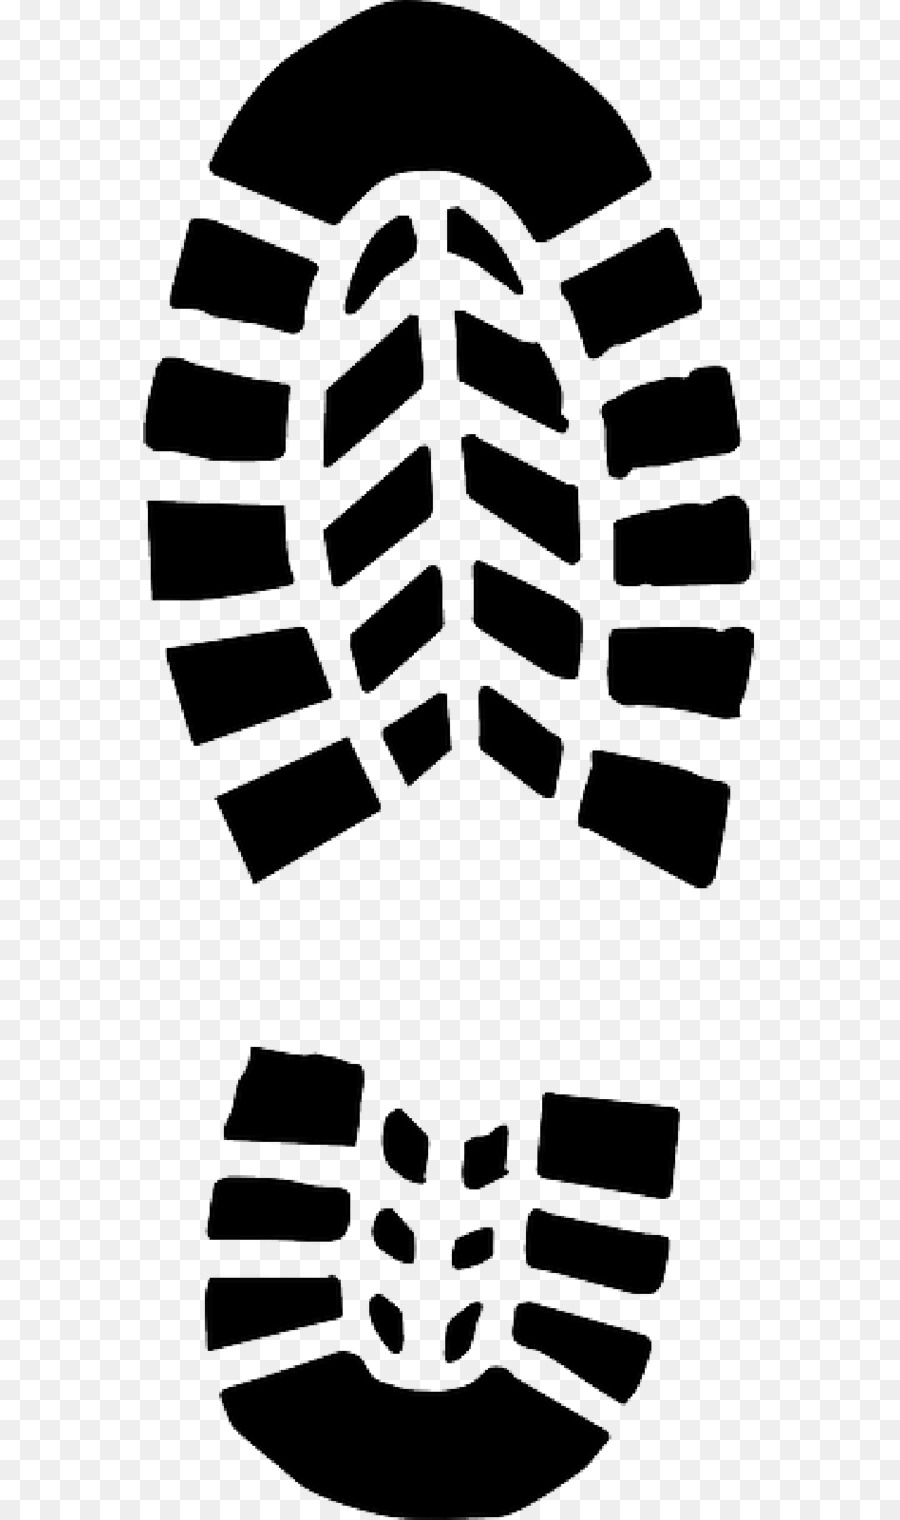 Shoe Hiking boot Printing Clip art - boot png download - 760*1520 - Free Transparent Shoe png Download.